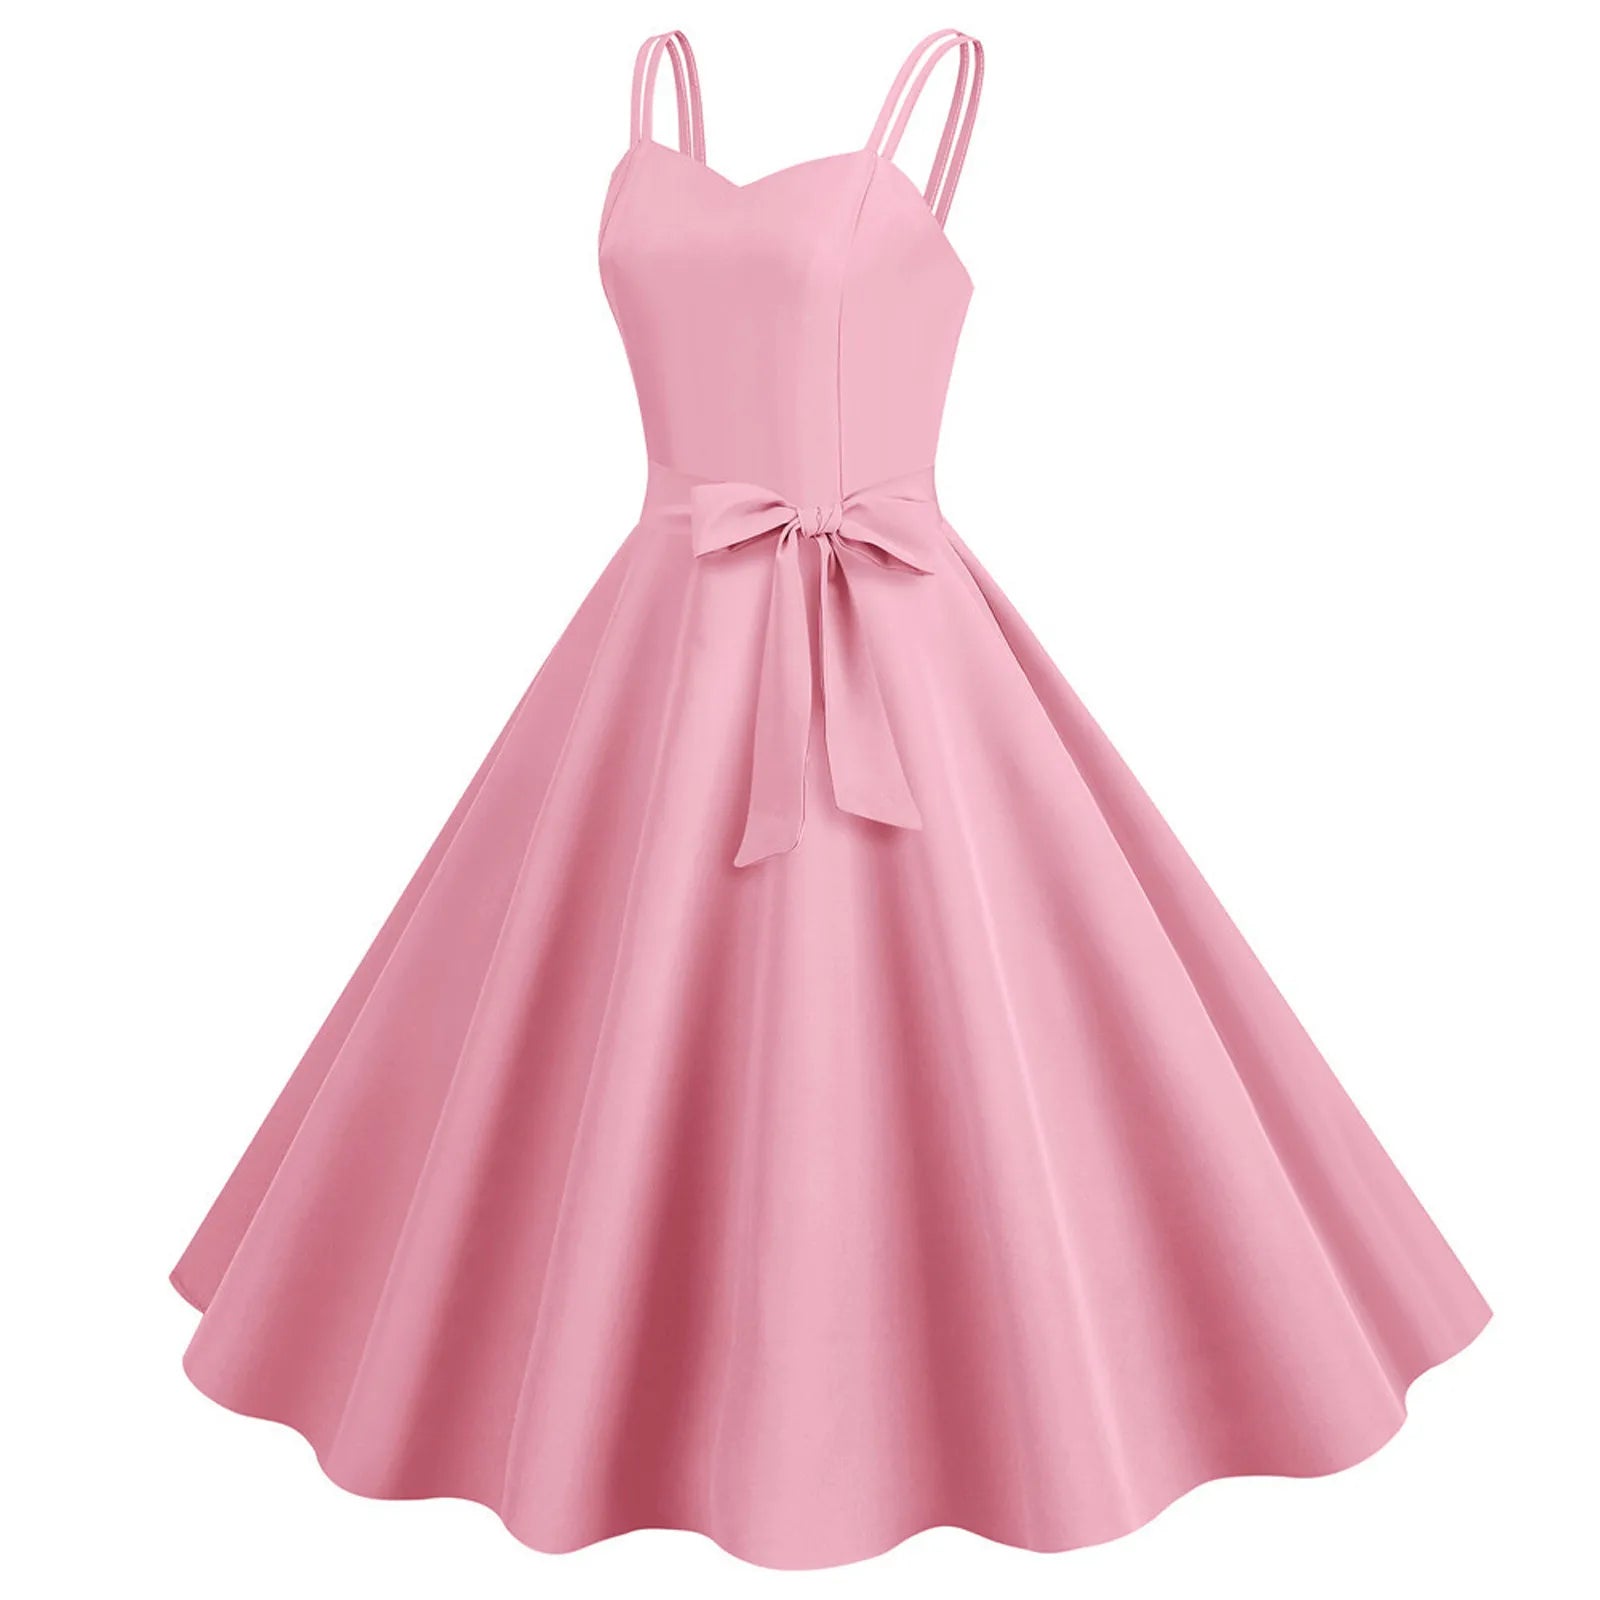 dresses for weddings as a guest formal Spaghetti Strap large Hem Solid Color midi with bowknot Back Zipper Elegant